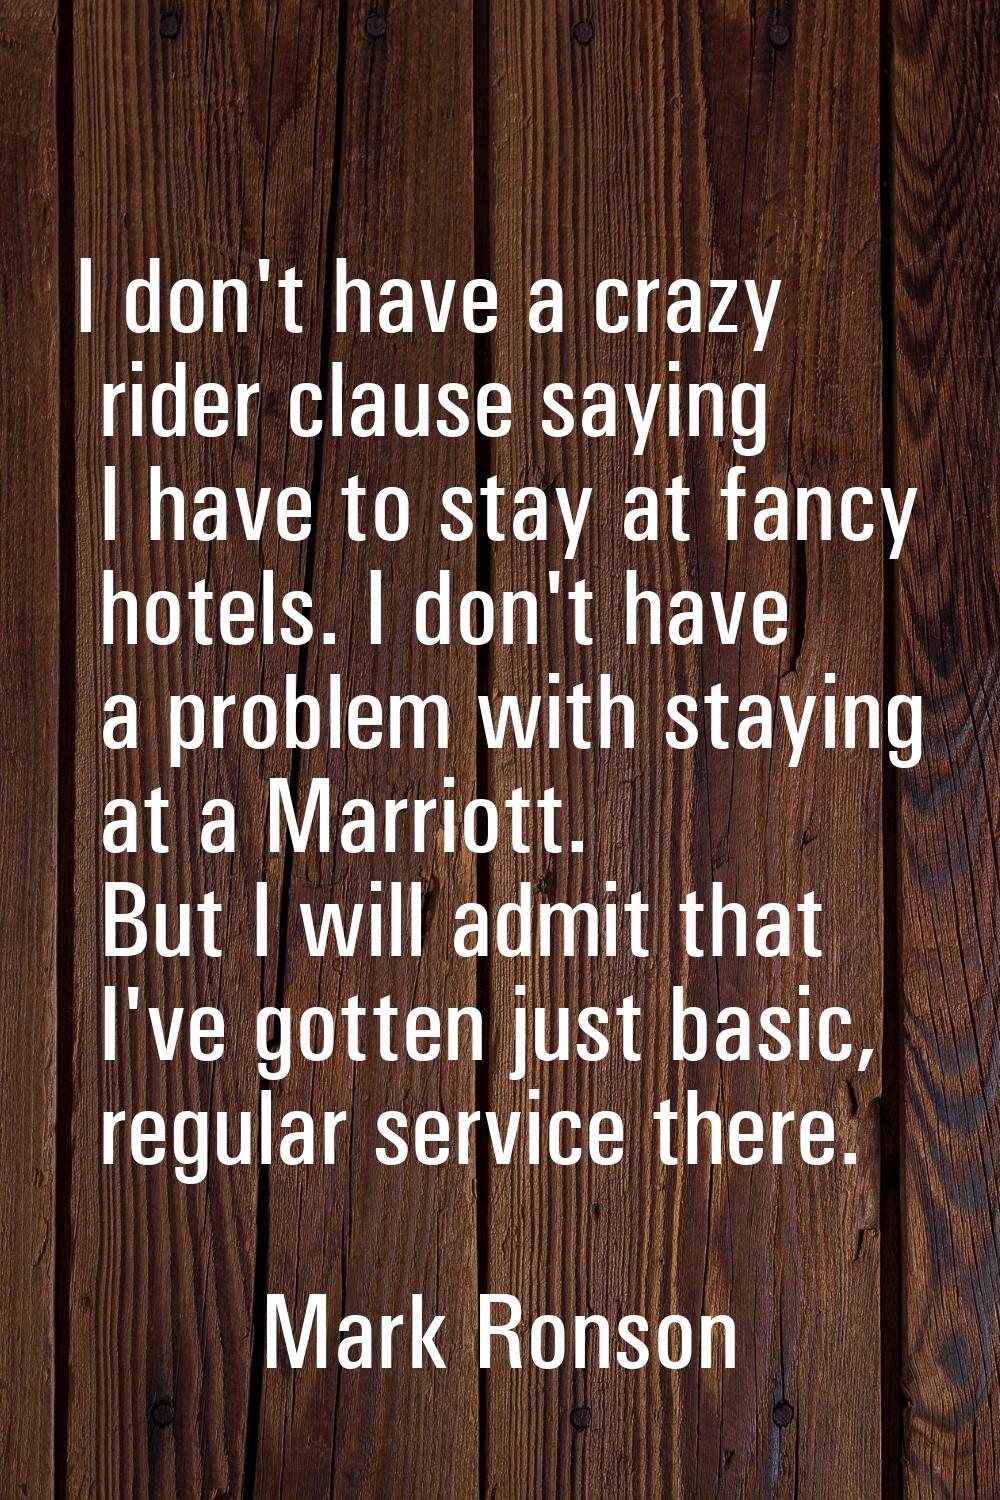 I don't have a crazy rider clause saying I have to stay at fancy hotels. I don't have a problem wit